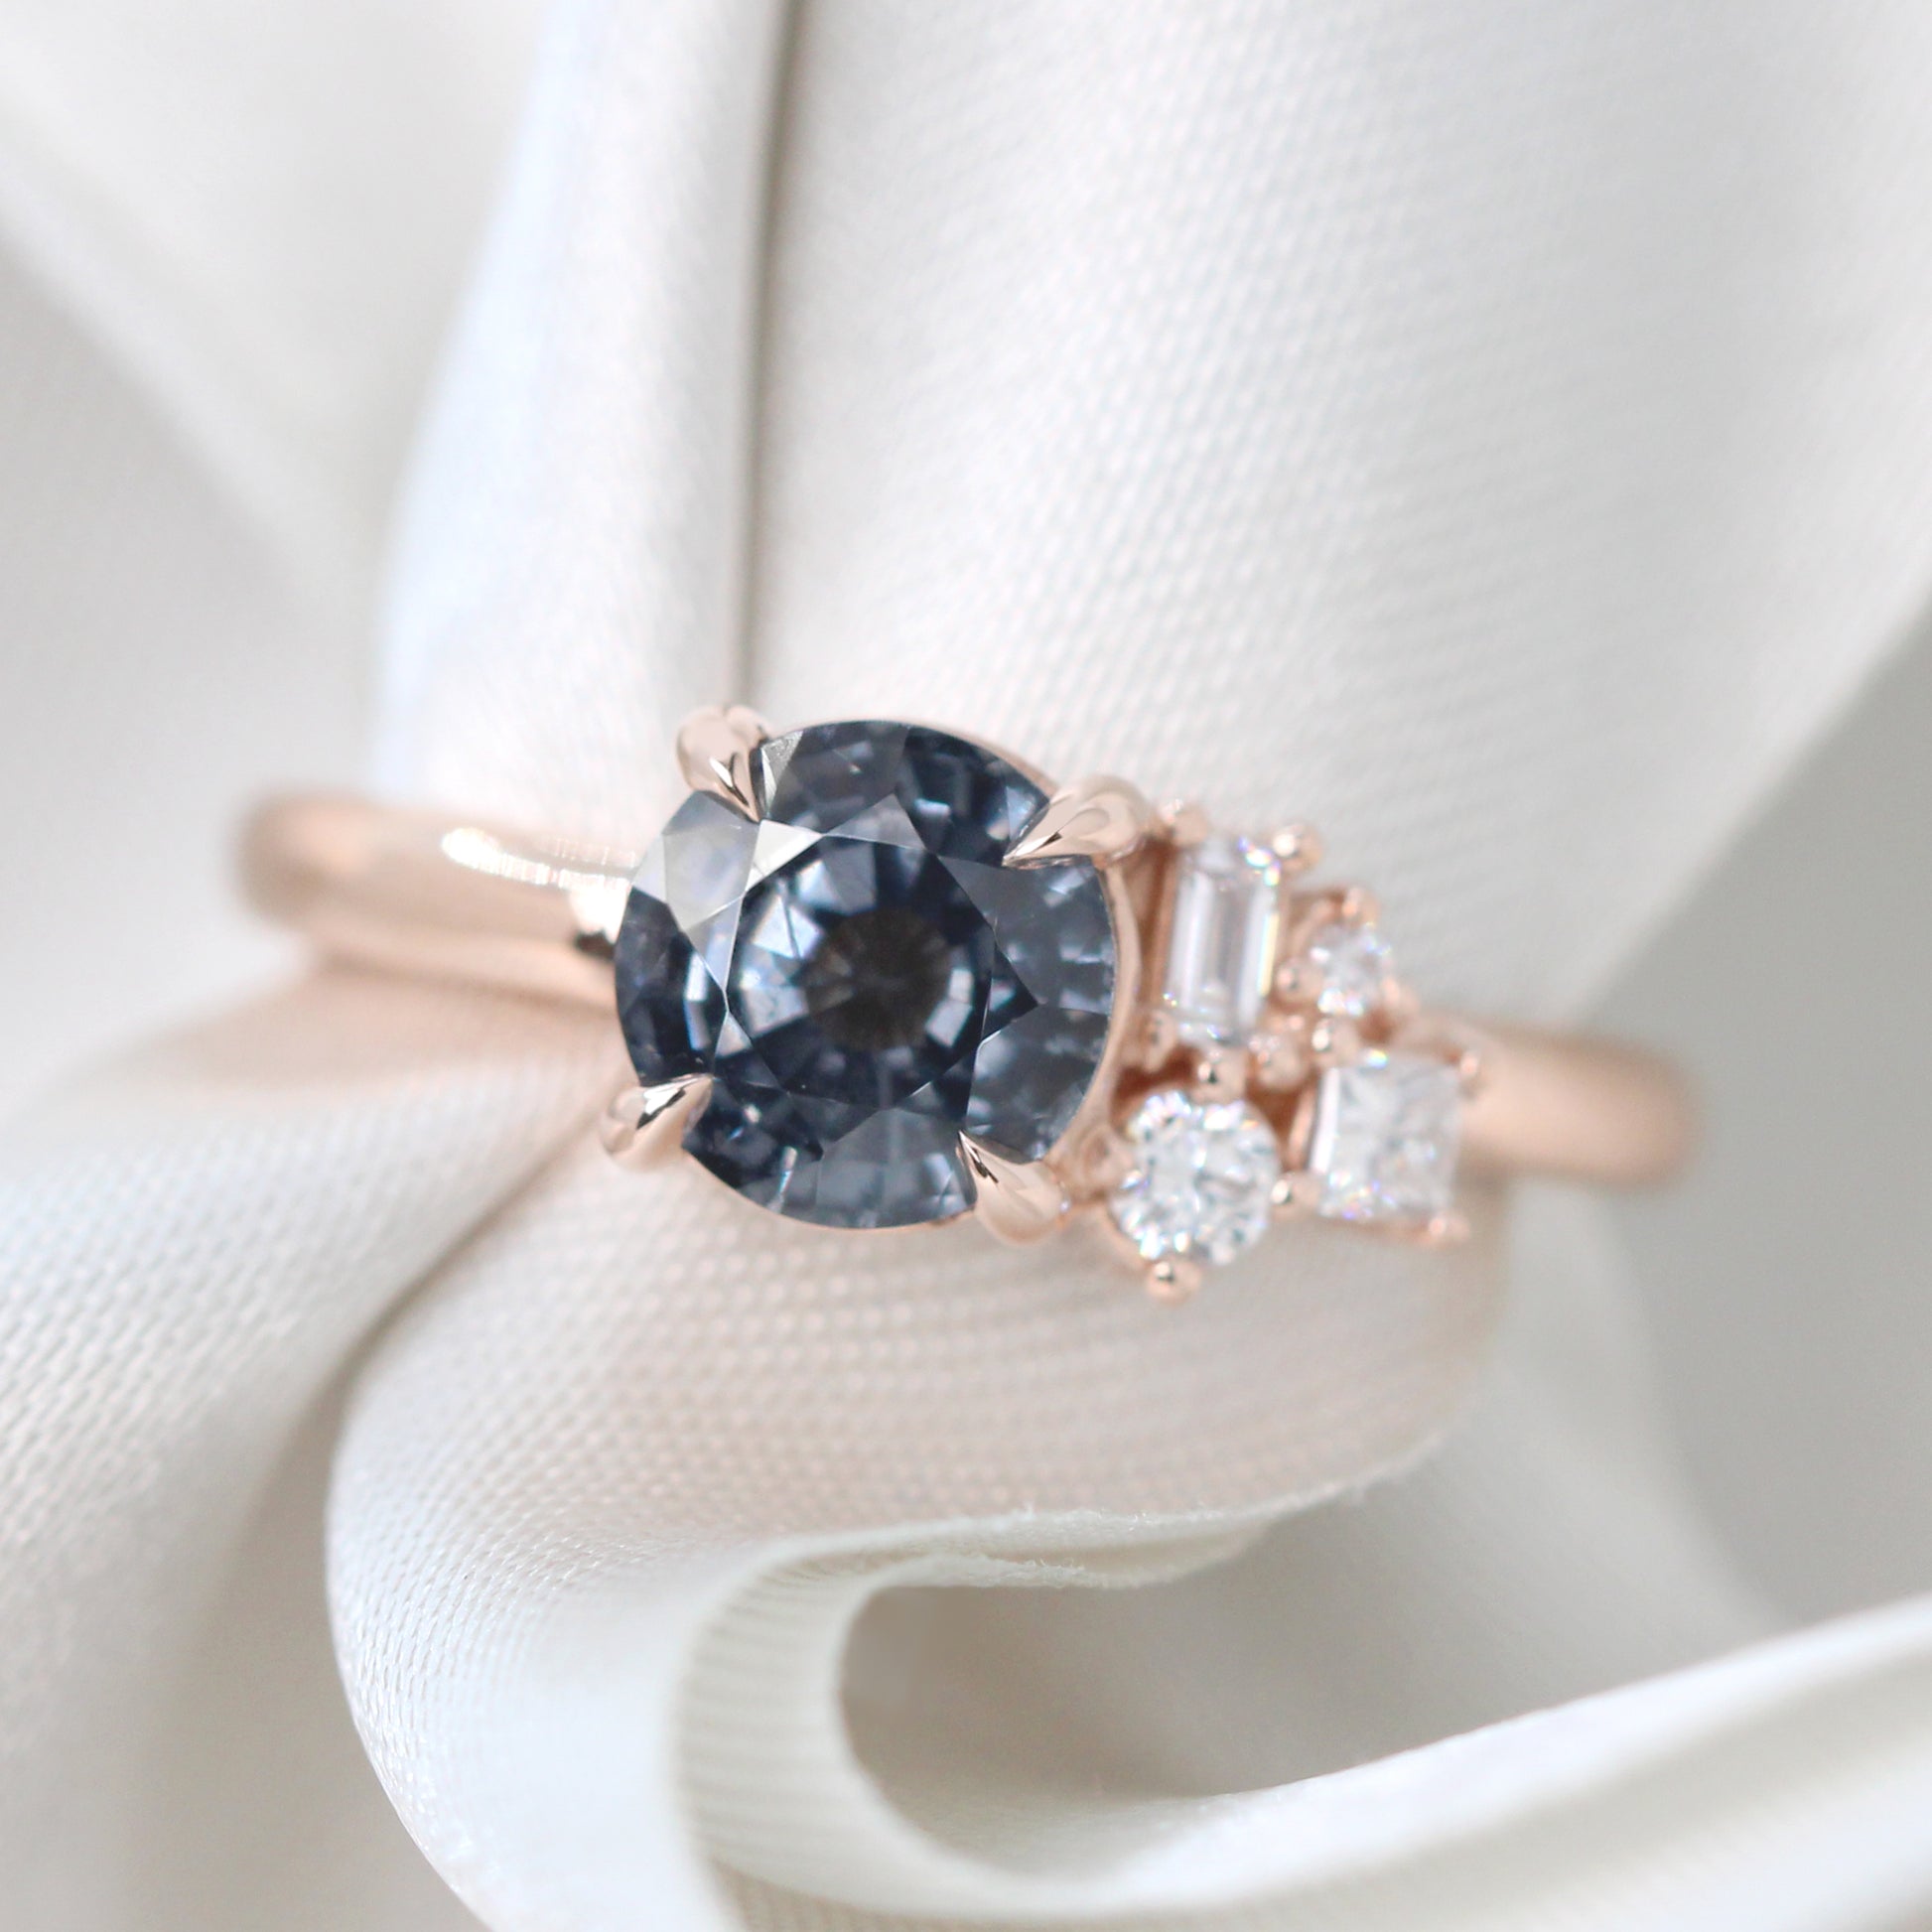 Abigail Ring with a 1.40 Carat Round Blue Gray Spinel and White Accent Diamonds in 14k Rose Gold - Ready to Size and Ship - Midwinter Co. Alternative Bridal Rings and Modern Fine Jewelry